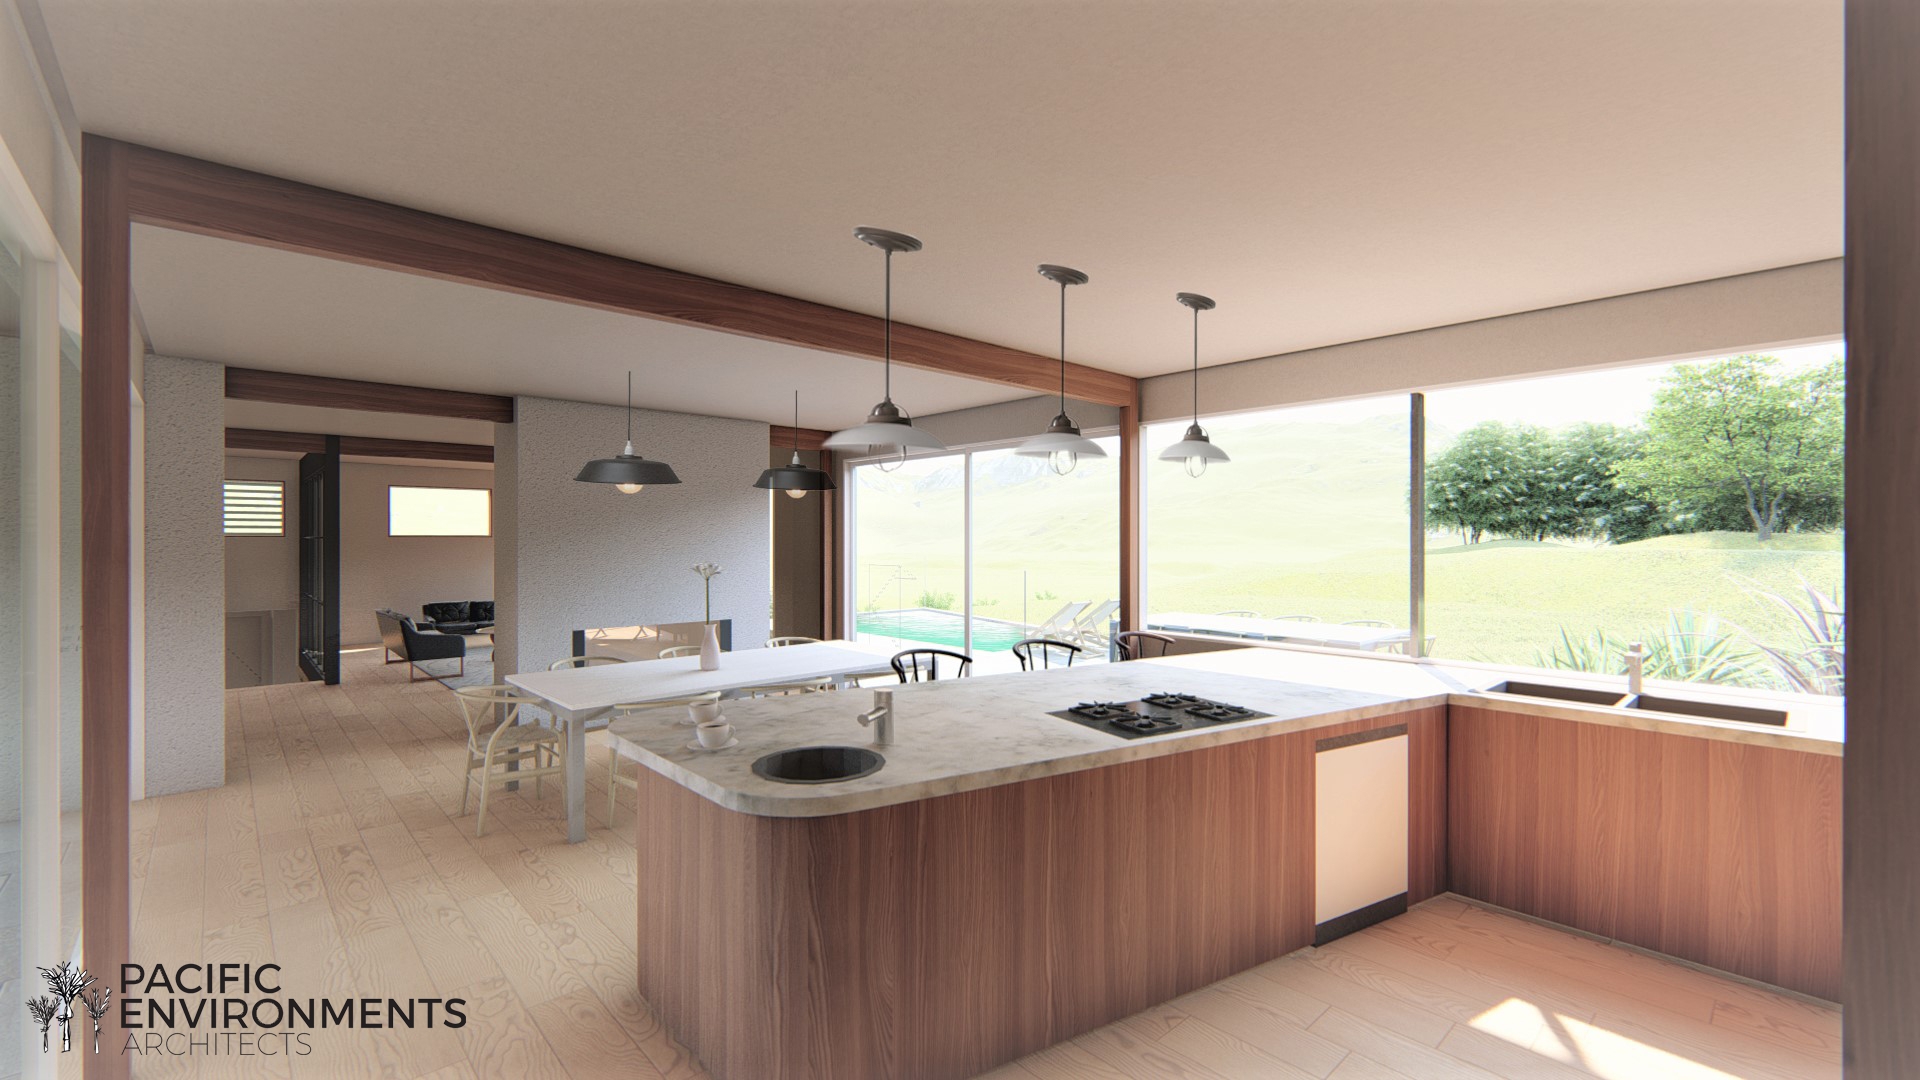 Kitchen and dining area render